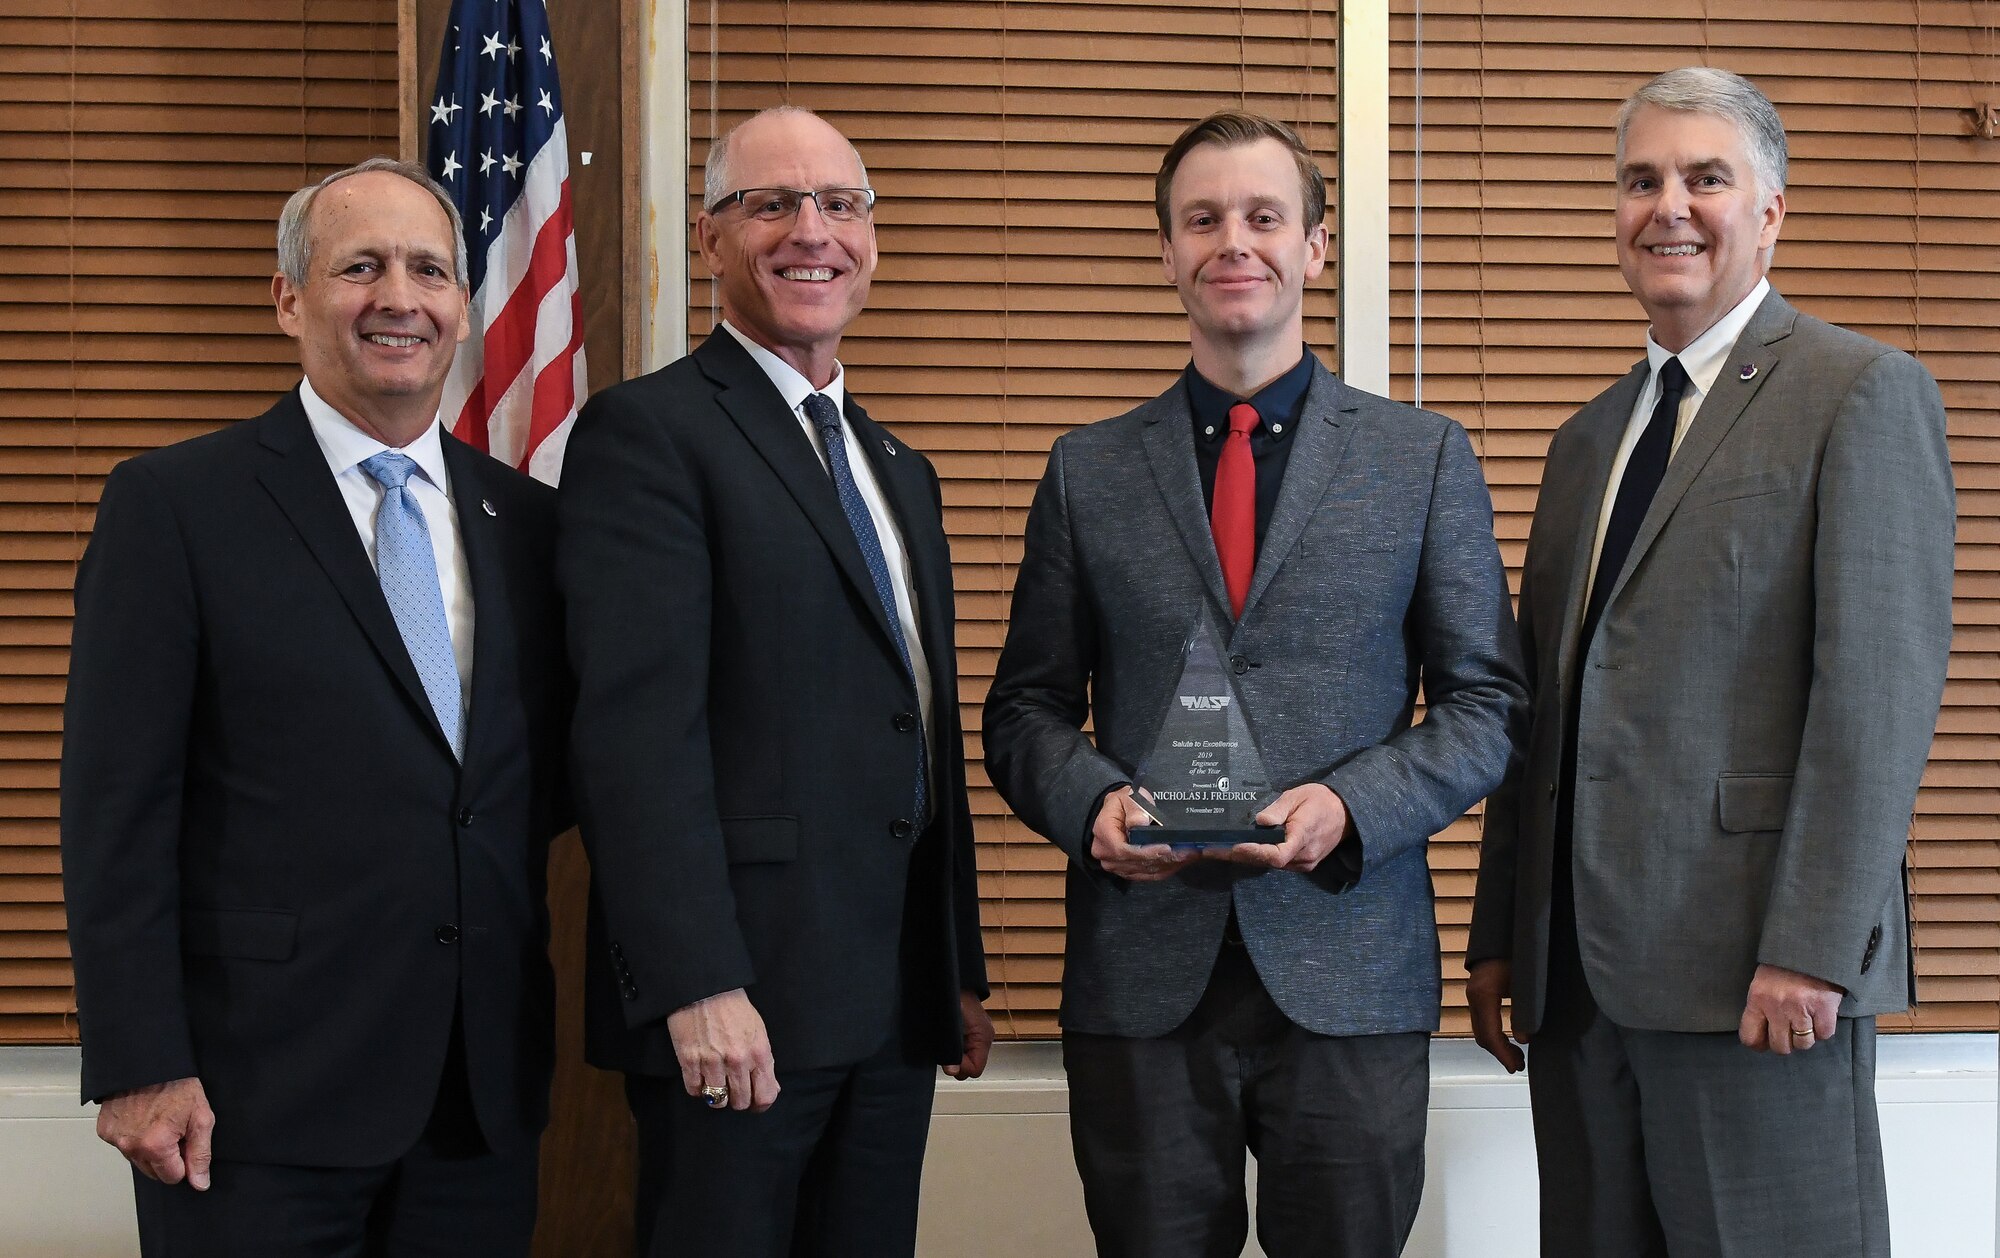 Mechanical/Aeronautical Engineer III Nicholas Fredrick, third from left, receives the Engineer of the Year award during the National Aerospace Solutions (NAS), LLC, Salute to Excellence Annual Awards Banquet, Nov. 5, 2019, at the Arnold Lakeside Center, Arnold Air Force Base, Tenn. Also pictured, from left, is NAS Deputy General Manager Michael Belzil, NAS General Manager Dr. Richard Tighe and NAS Mission Execution Director Jeff Henderson. (U.S. Air Force photo by Jill Pickett)